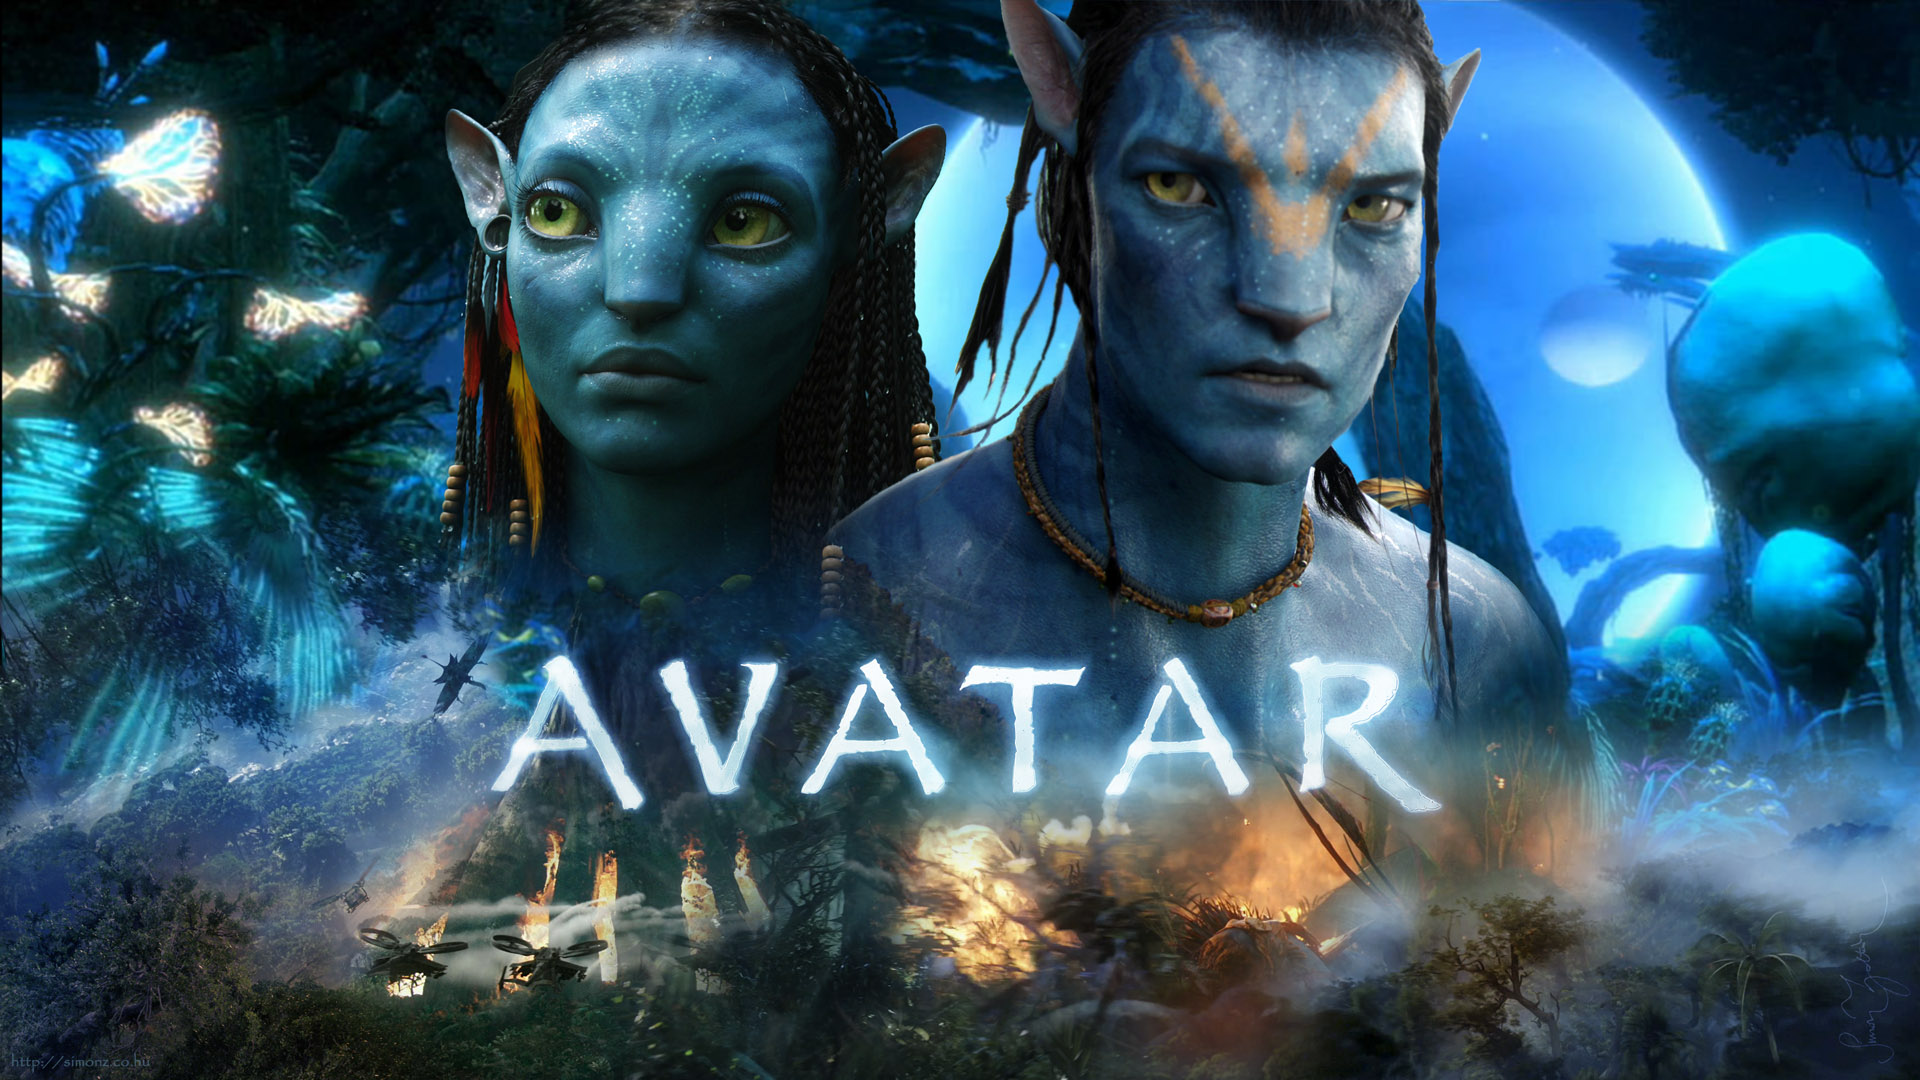 ‘Avatar’ became the highest grossing movie in the world again